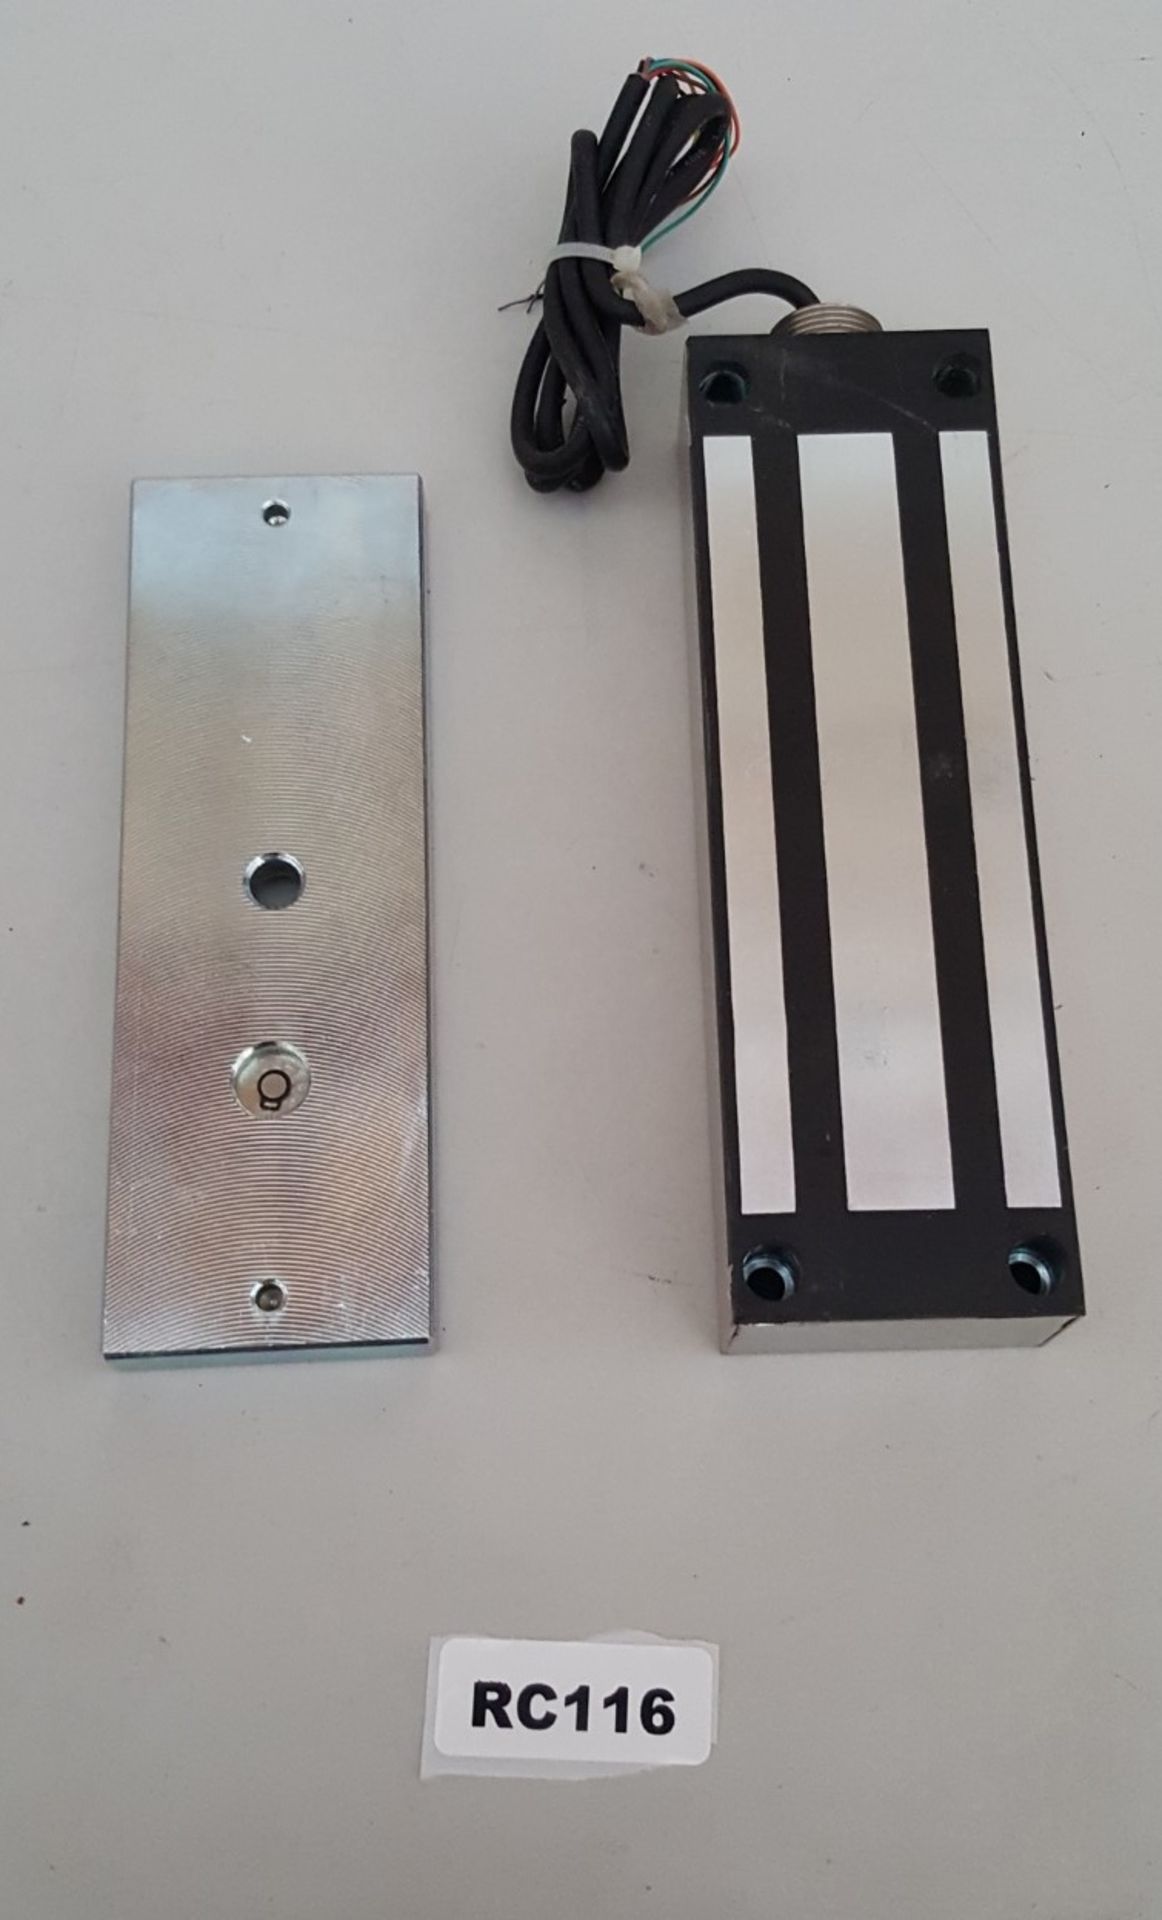 1 x Electromagnetic Outdoor Magnet lock ELS-1200-M - Ref RC116 - CL011 - Location: Altrincham WA14 < - Image 2 of 2